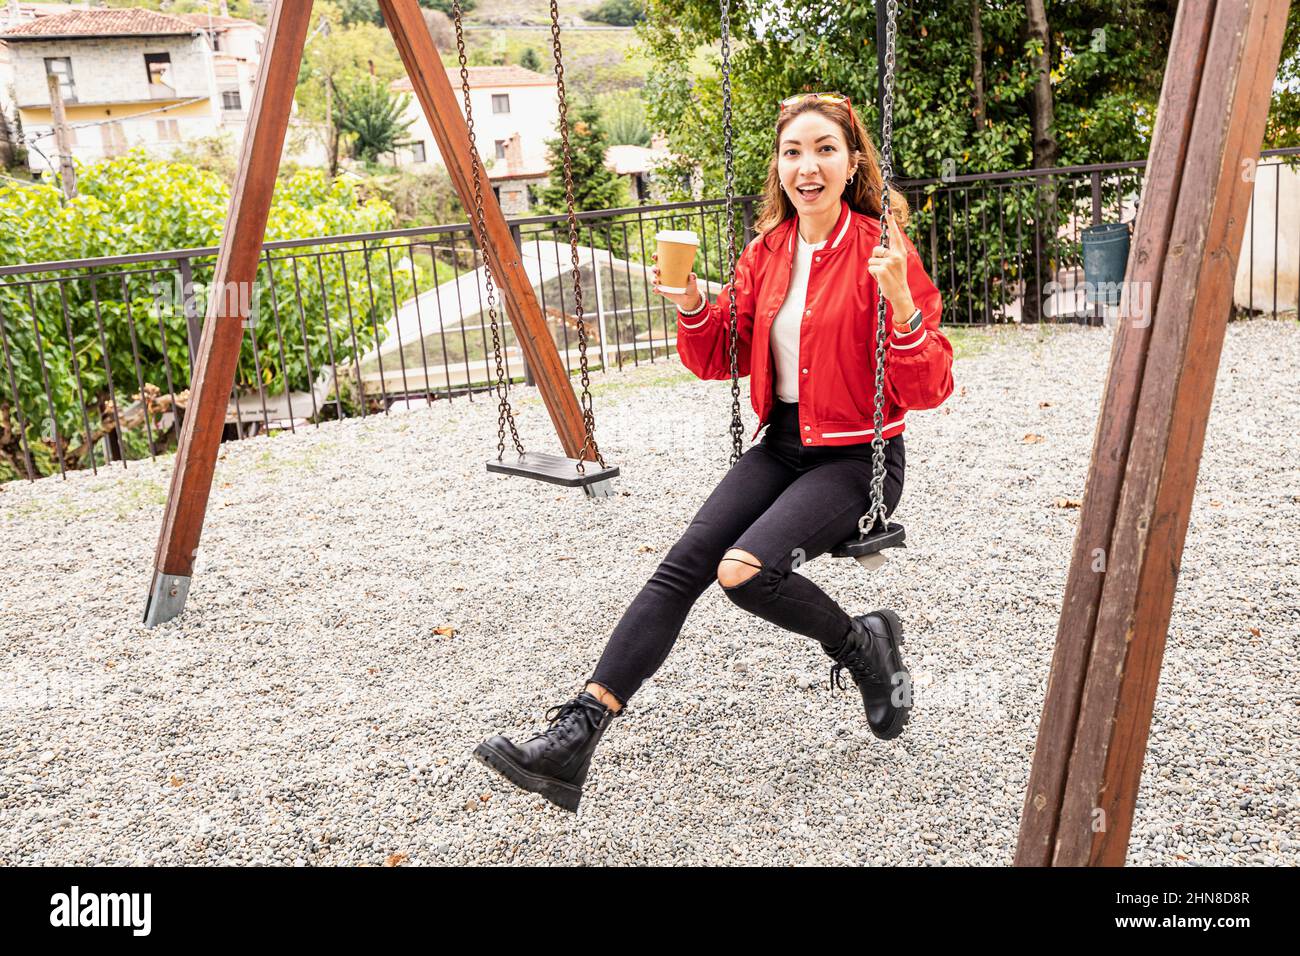 An adult woman on a swing in a city park. Stock Photo